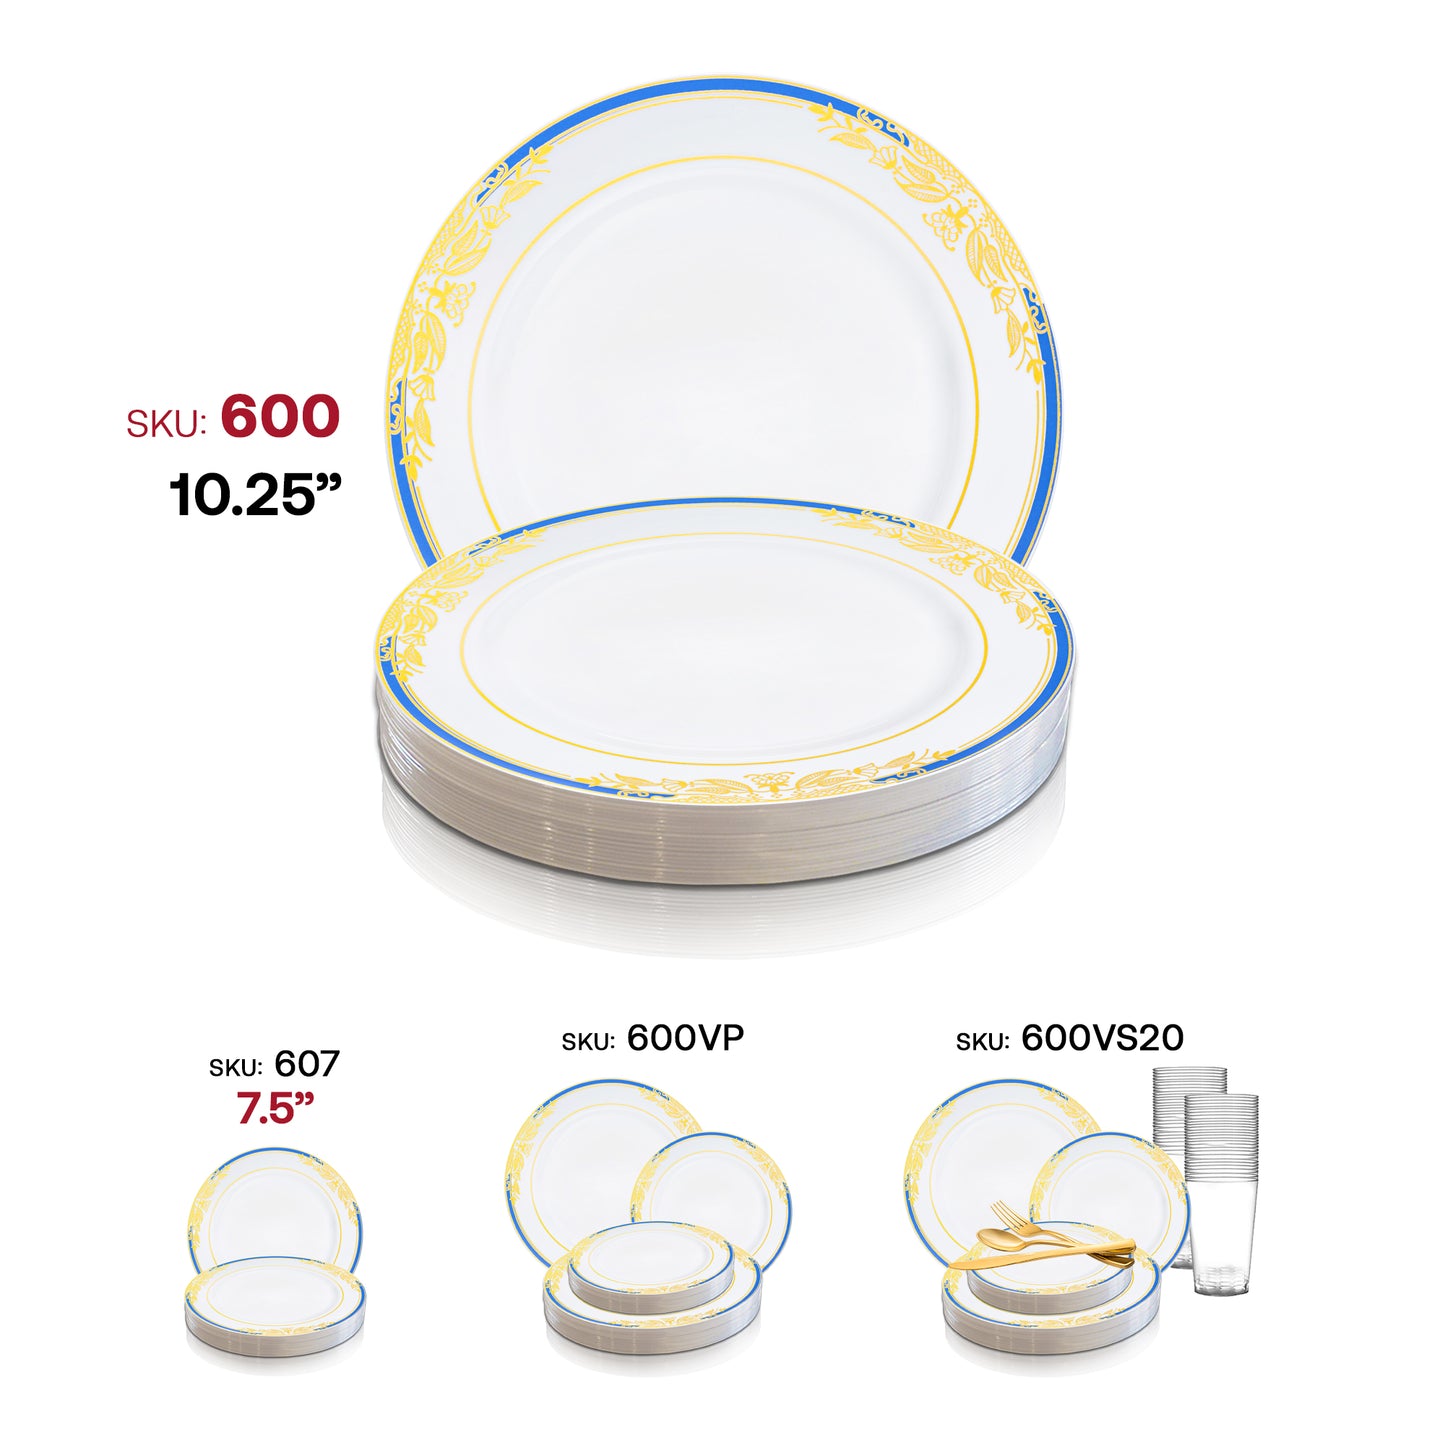 White with Blue and Gold Harmony Rim Plastic Dinner Plates (10.25") SKU | The Kaya Collection